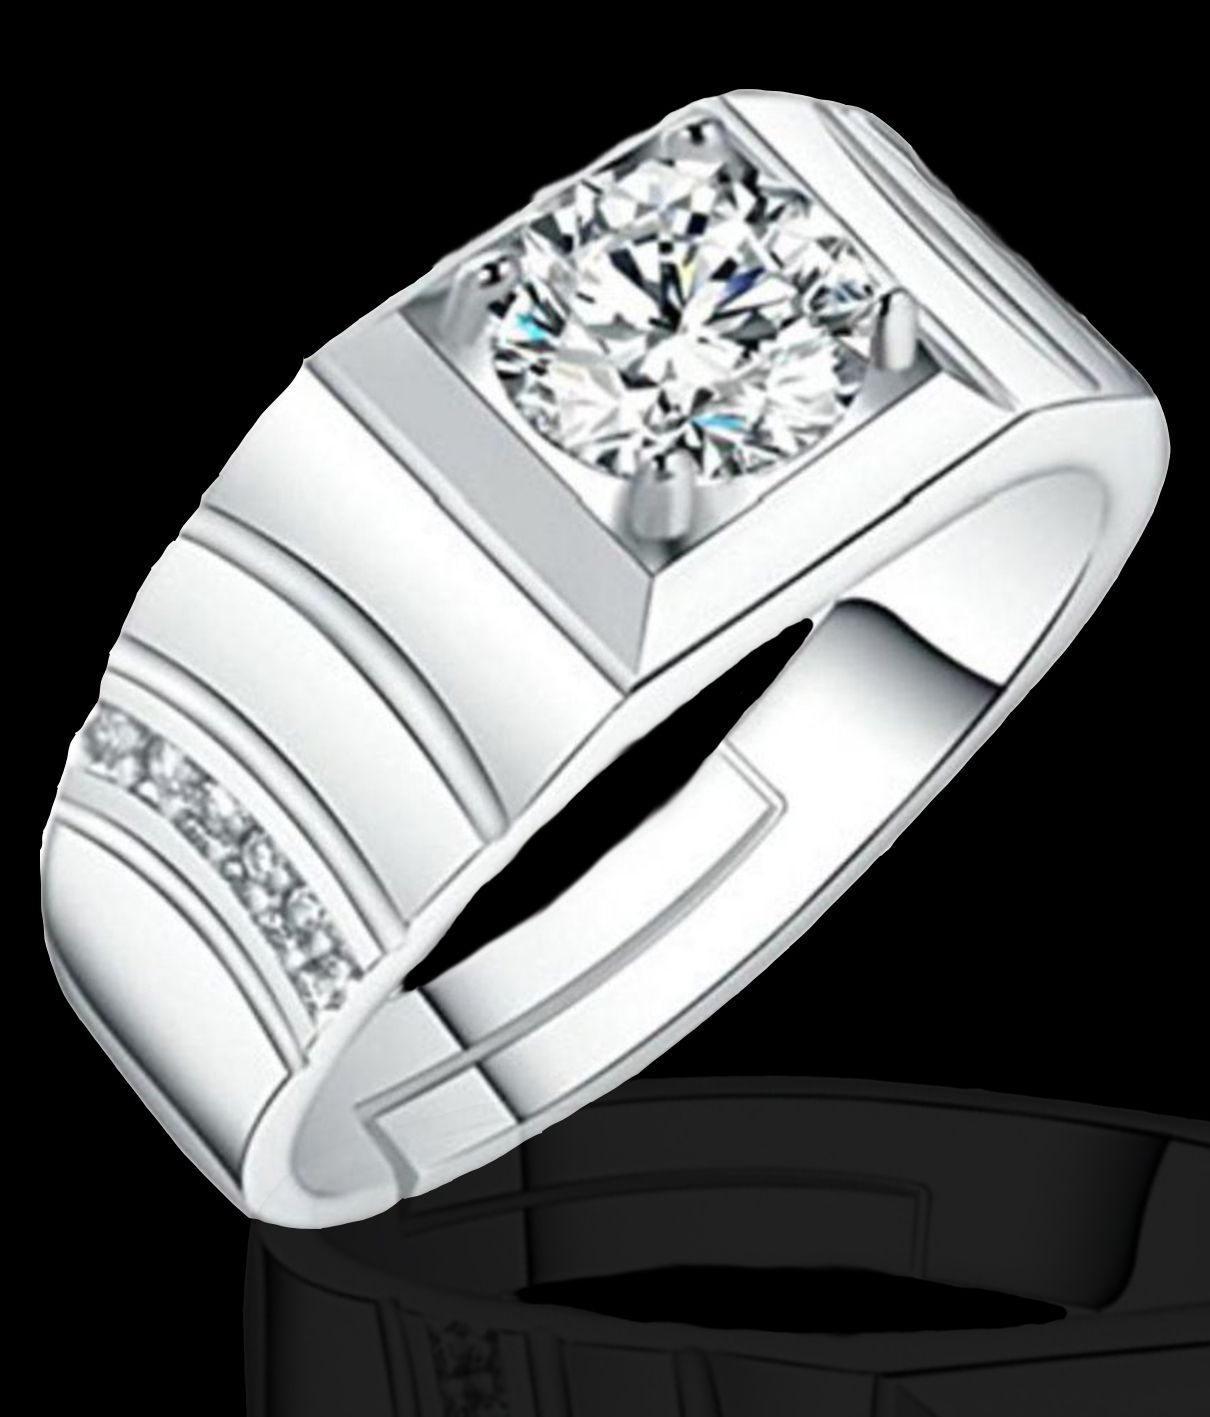 Exclusive Limited Edition Sterling Silver Swarovski Solitaire